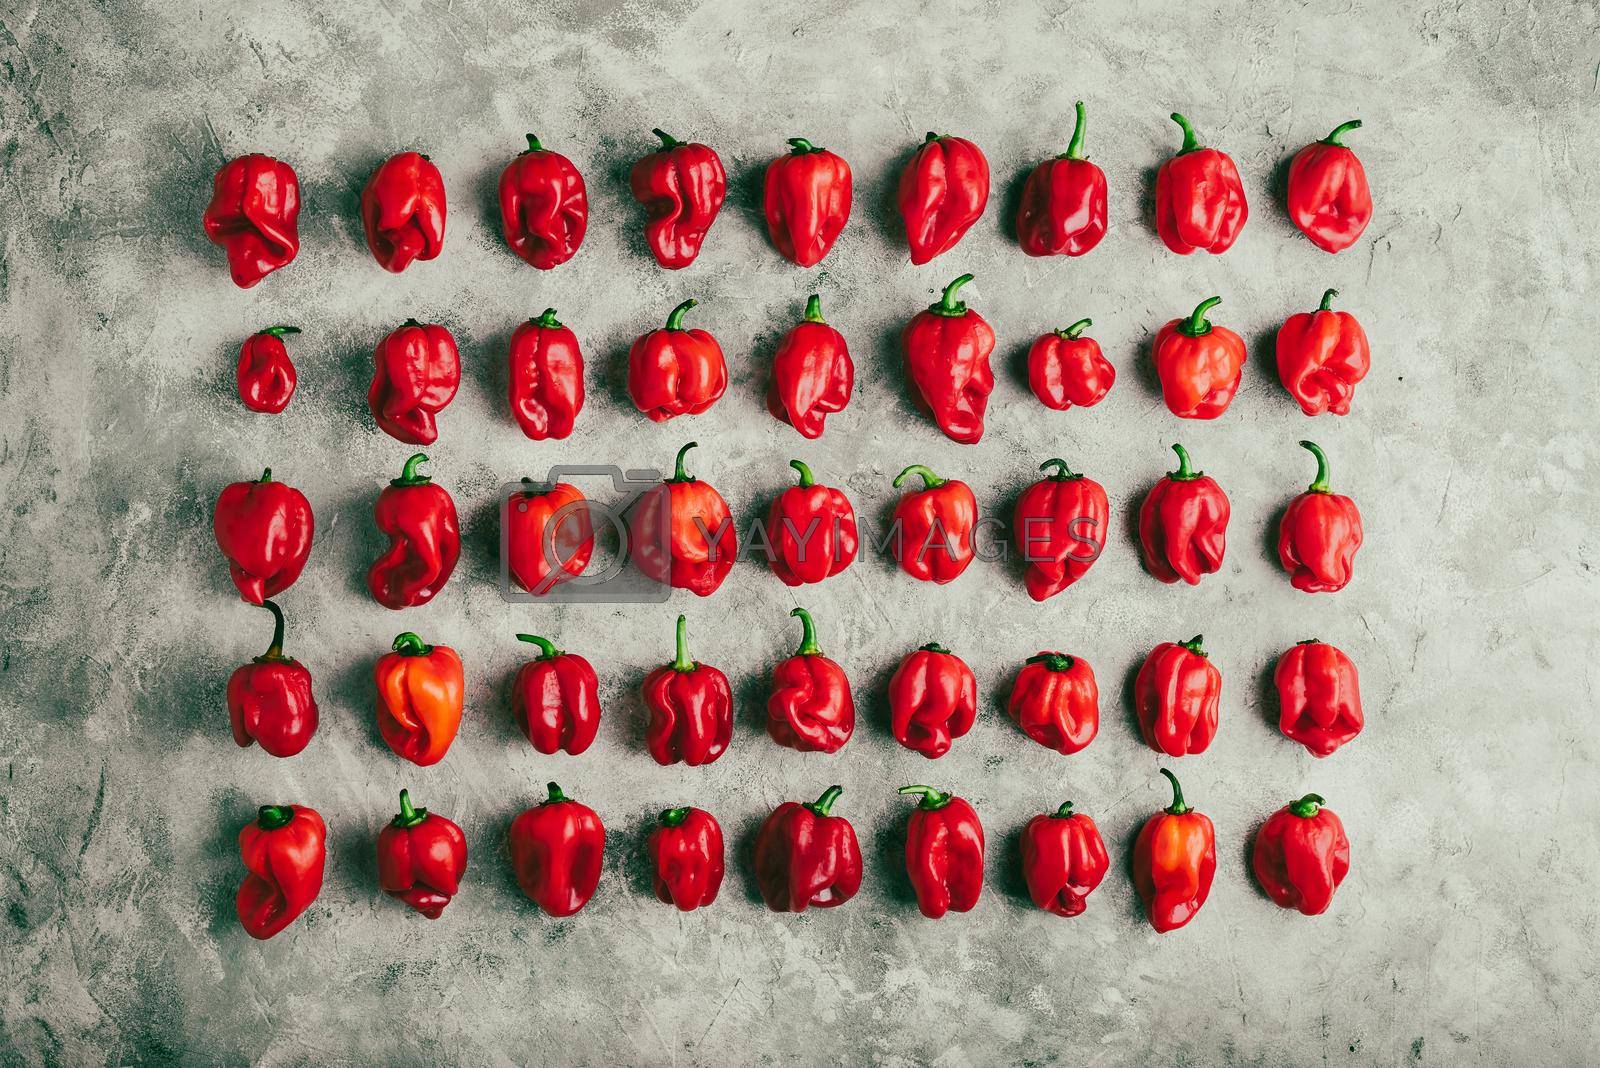 Royalty free image of Rows of Red Habanero Peppers on Gray Concrete Surface by Seva_blsv